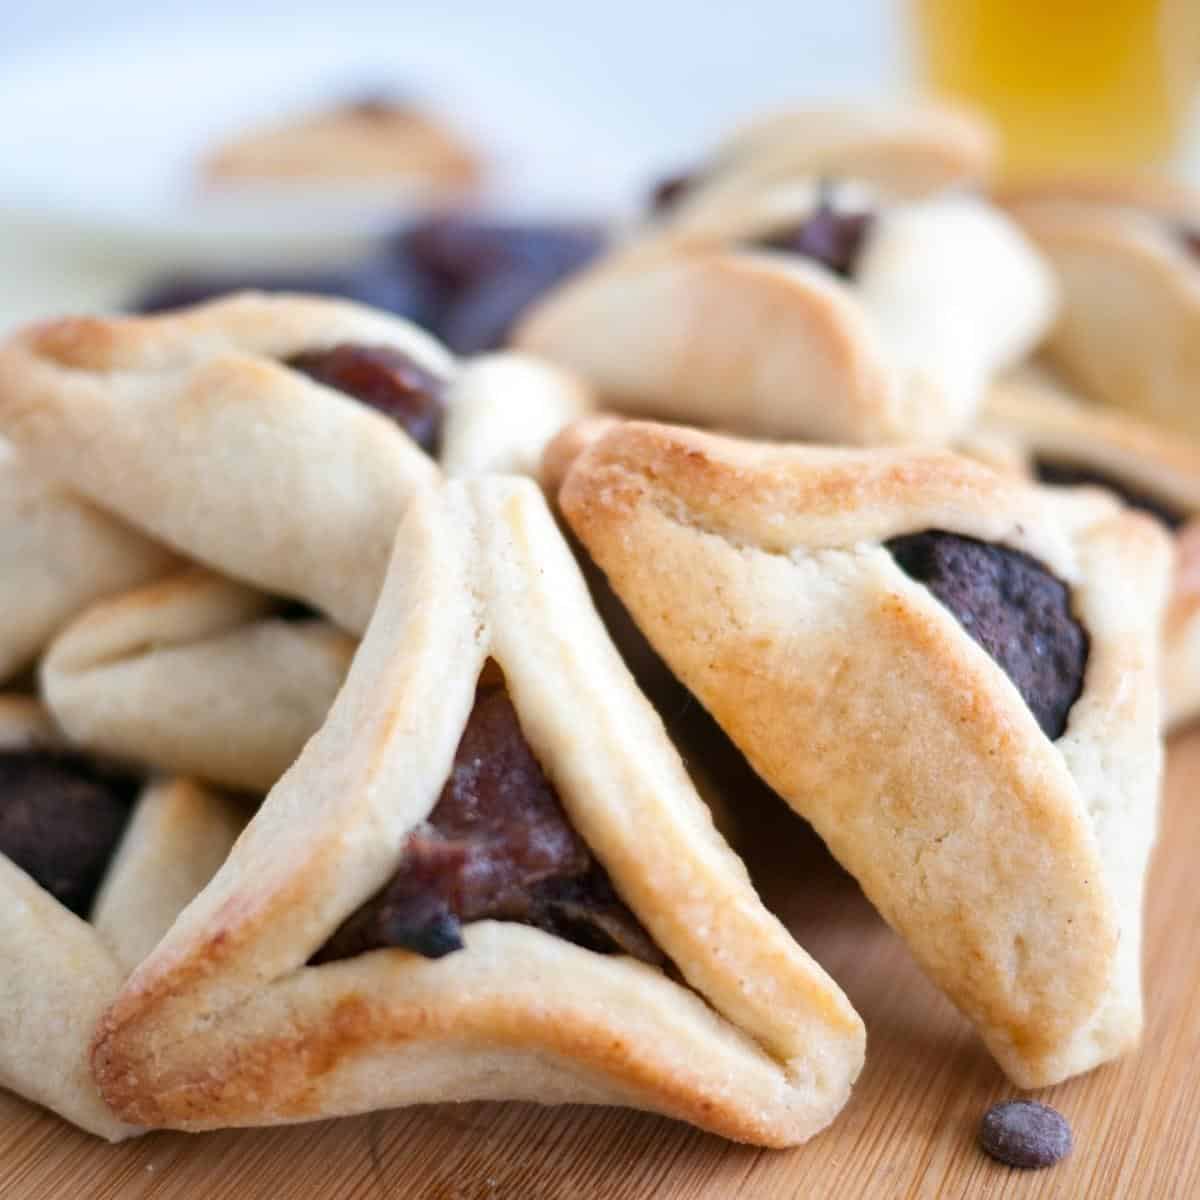 Purim cookies on a wooden board